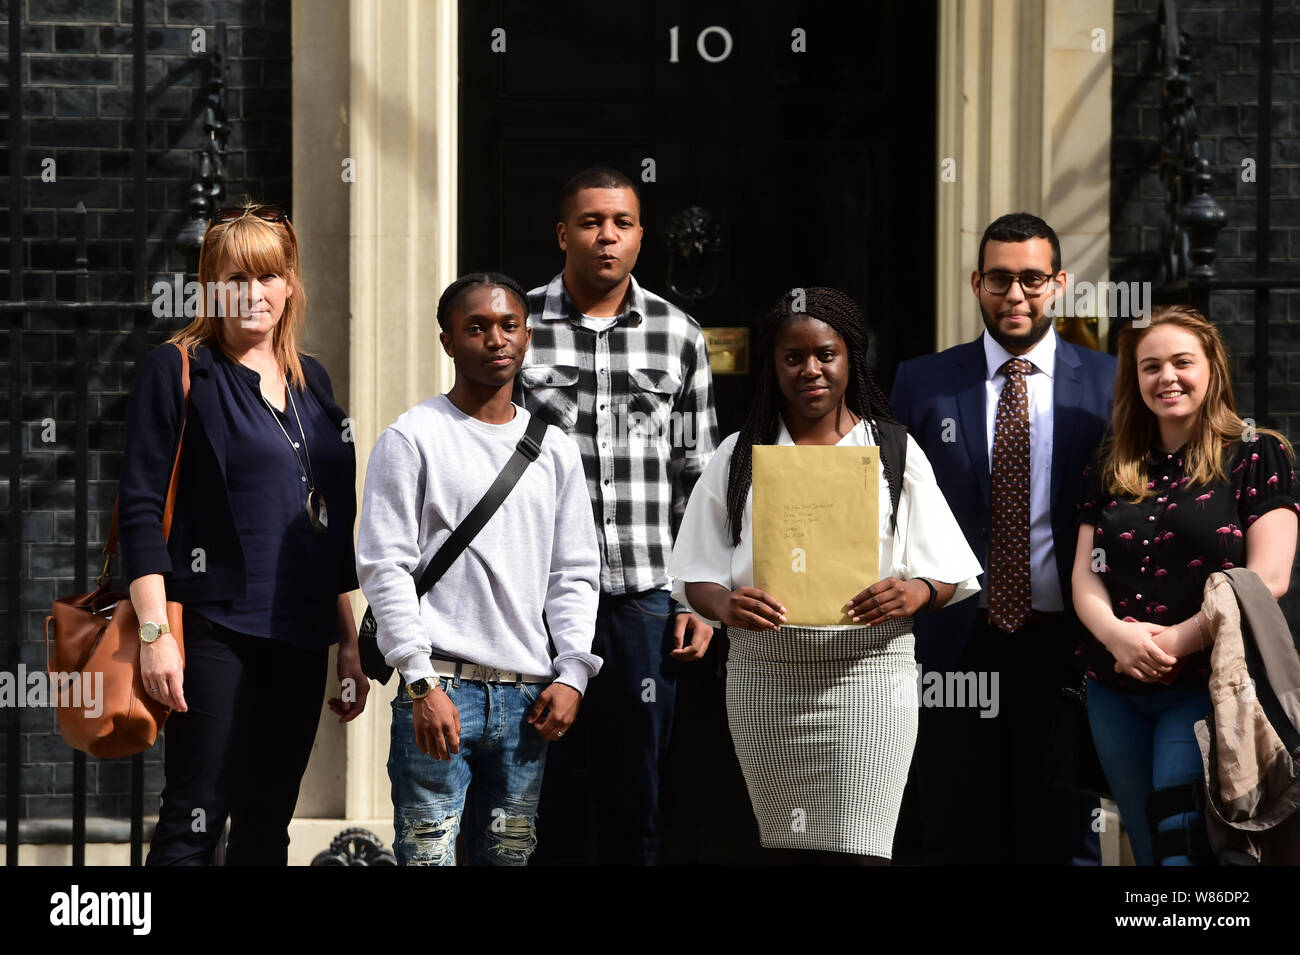 Sarah Jones MP (left) with young people, left to right) Demetri, Zak, Eden, Hamza and Rosa (surnames not given) who have been affected by knife crime to deliver a letter to 10 Downing Street asking to be listened to, in the debate on knife crime. Stock Photo